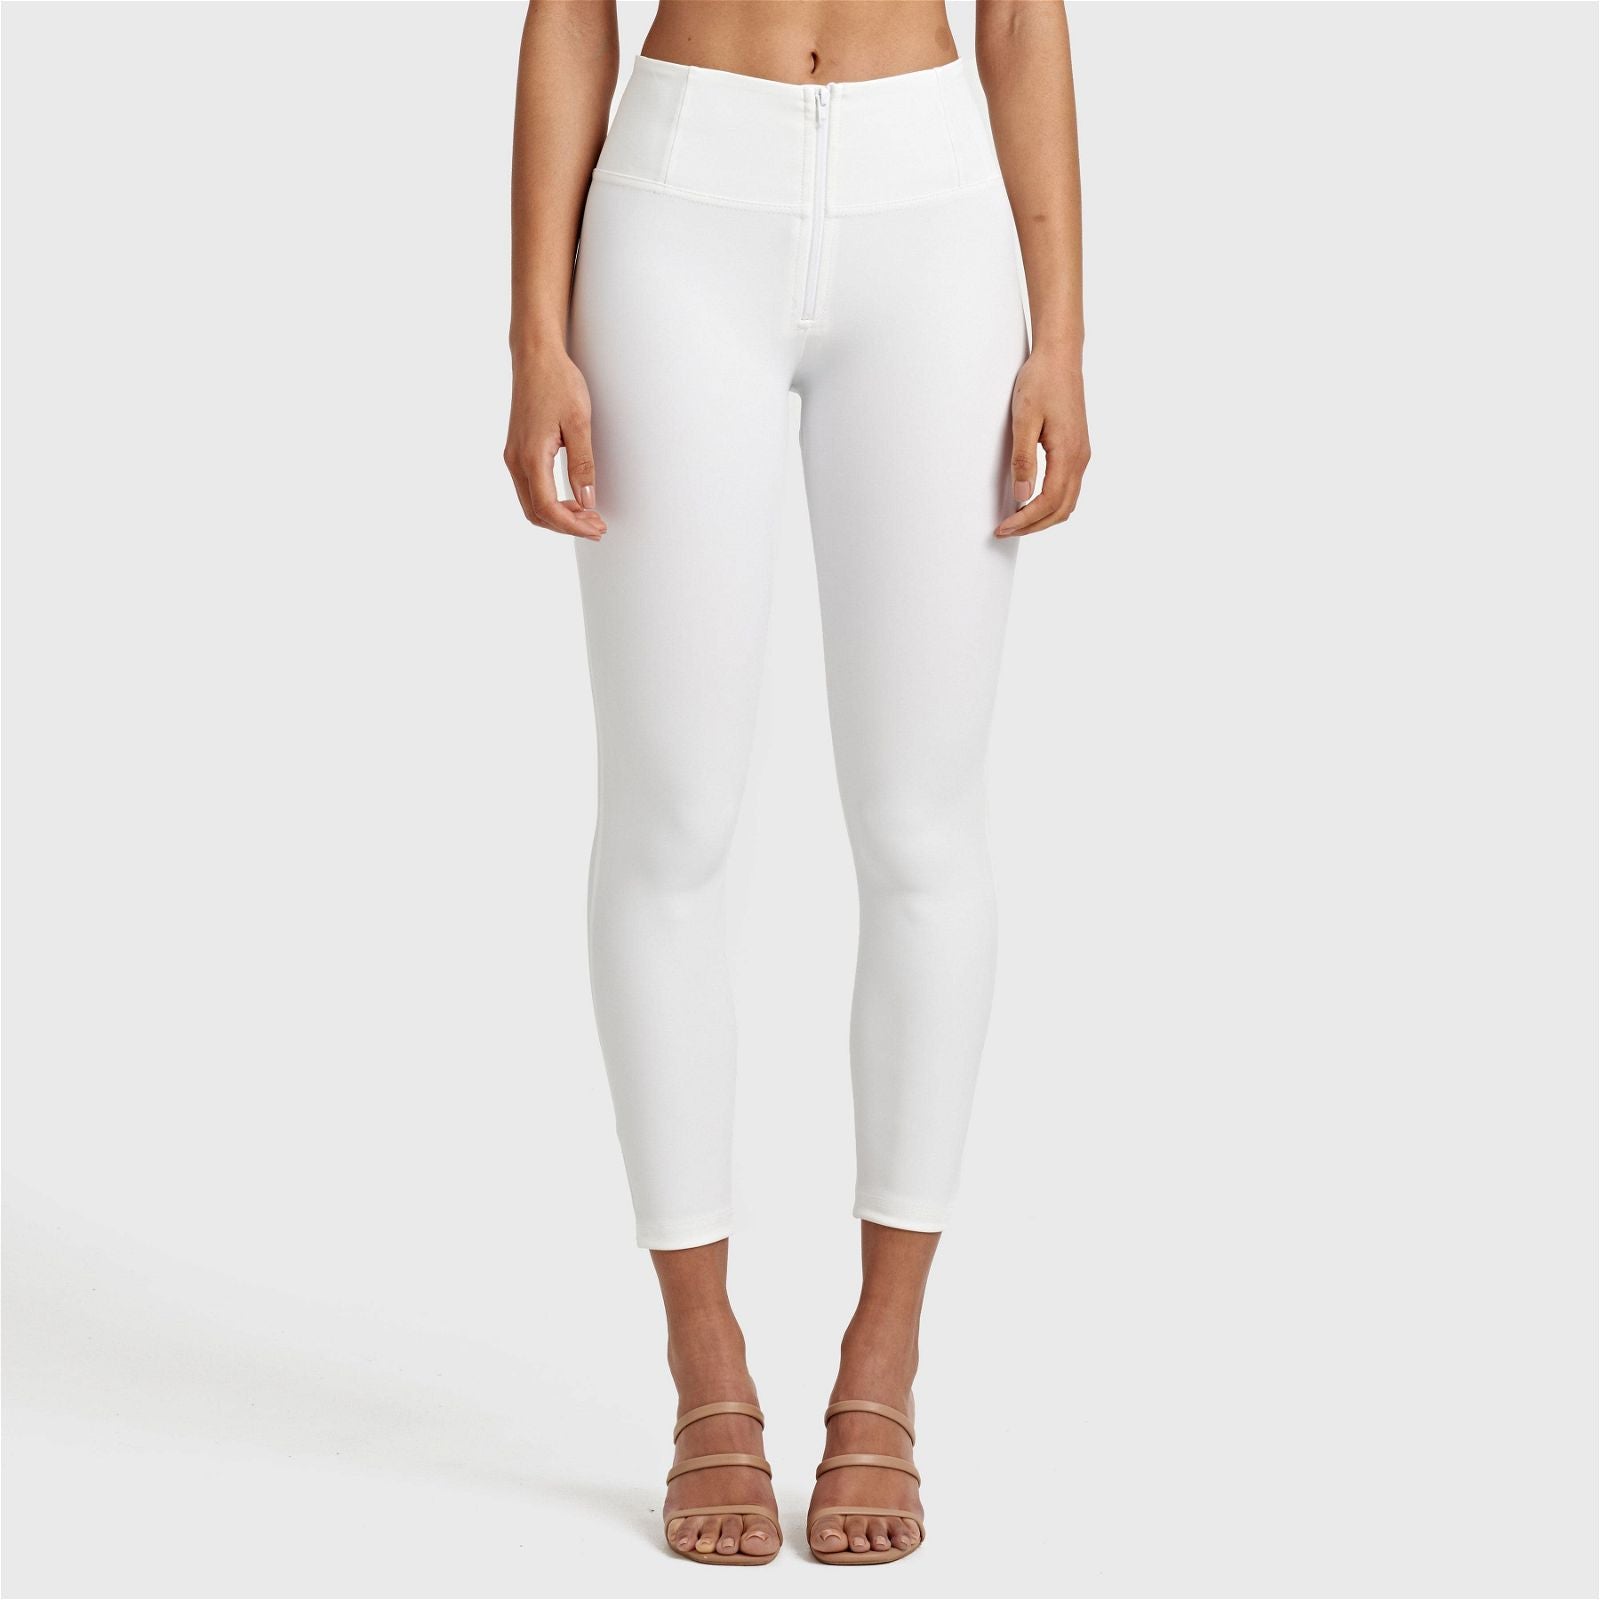 WR.UP® Faux Leather - High Waisted - 7/8 Length - White 3